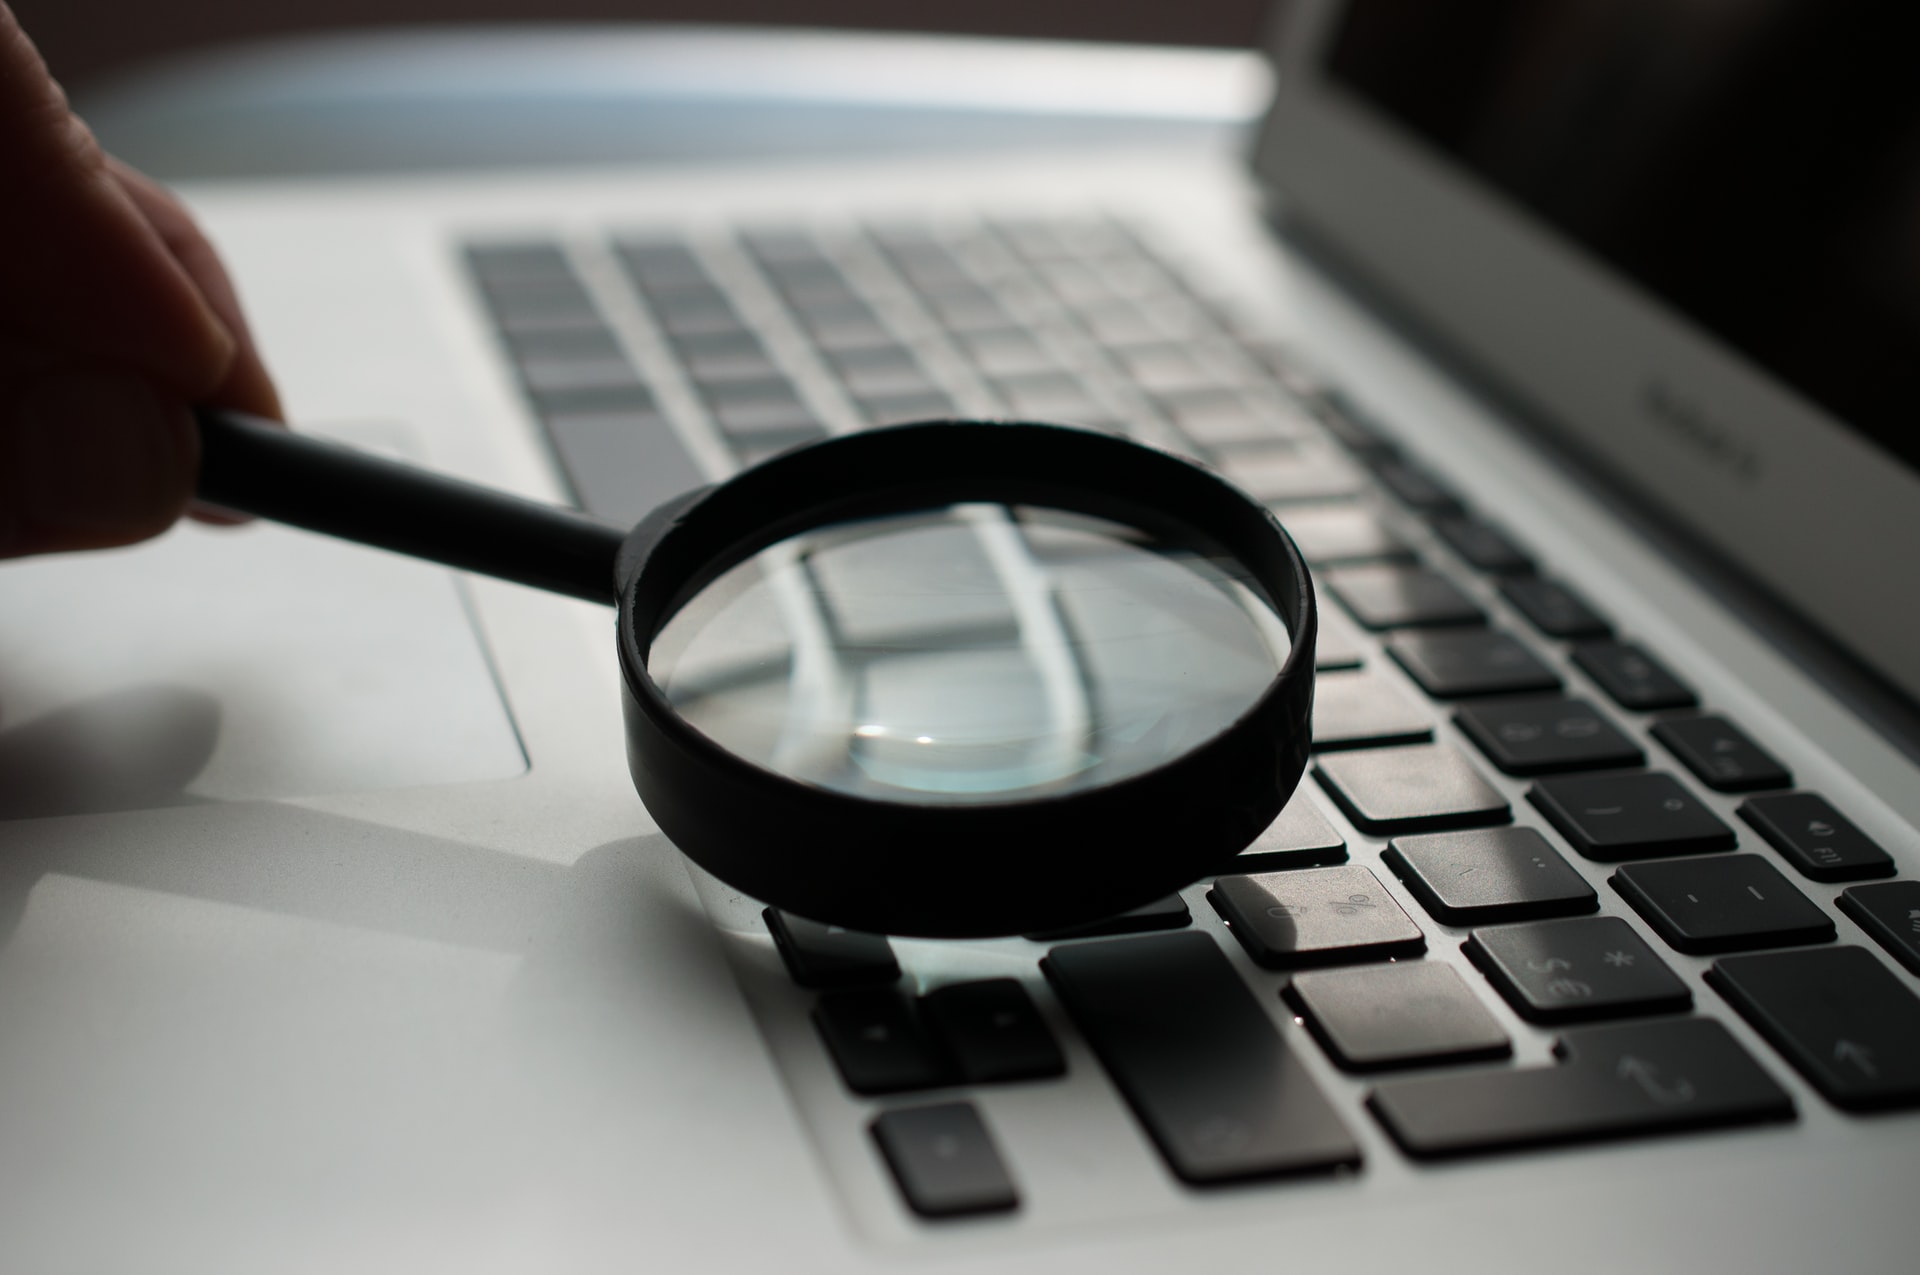 A magnifying glass pointed at a laptop keyboard